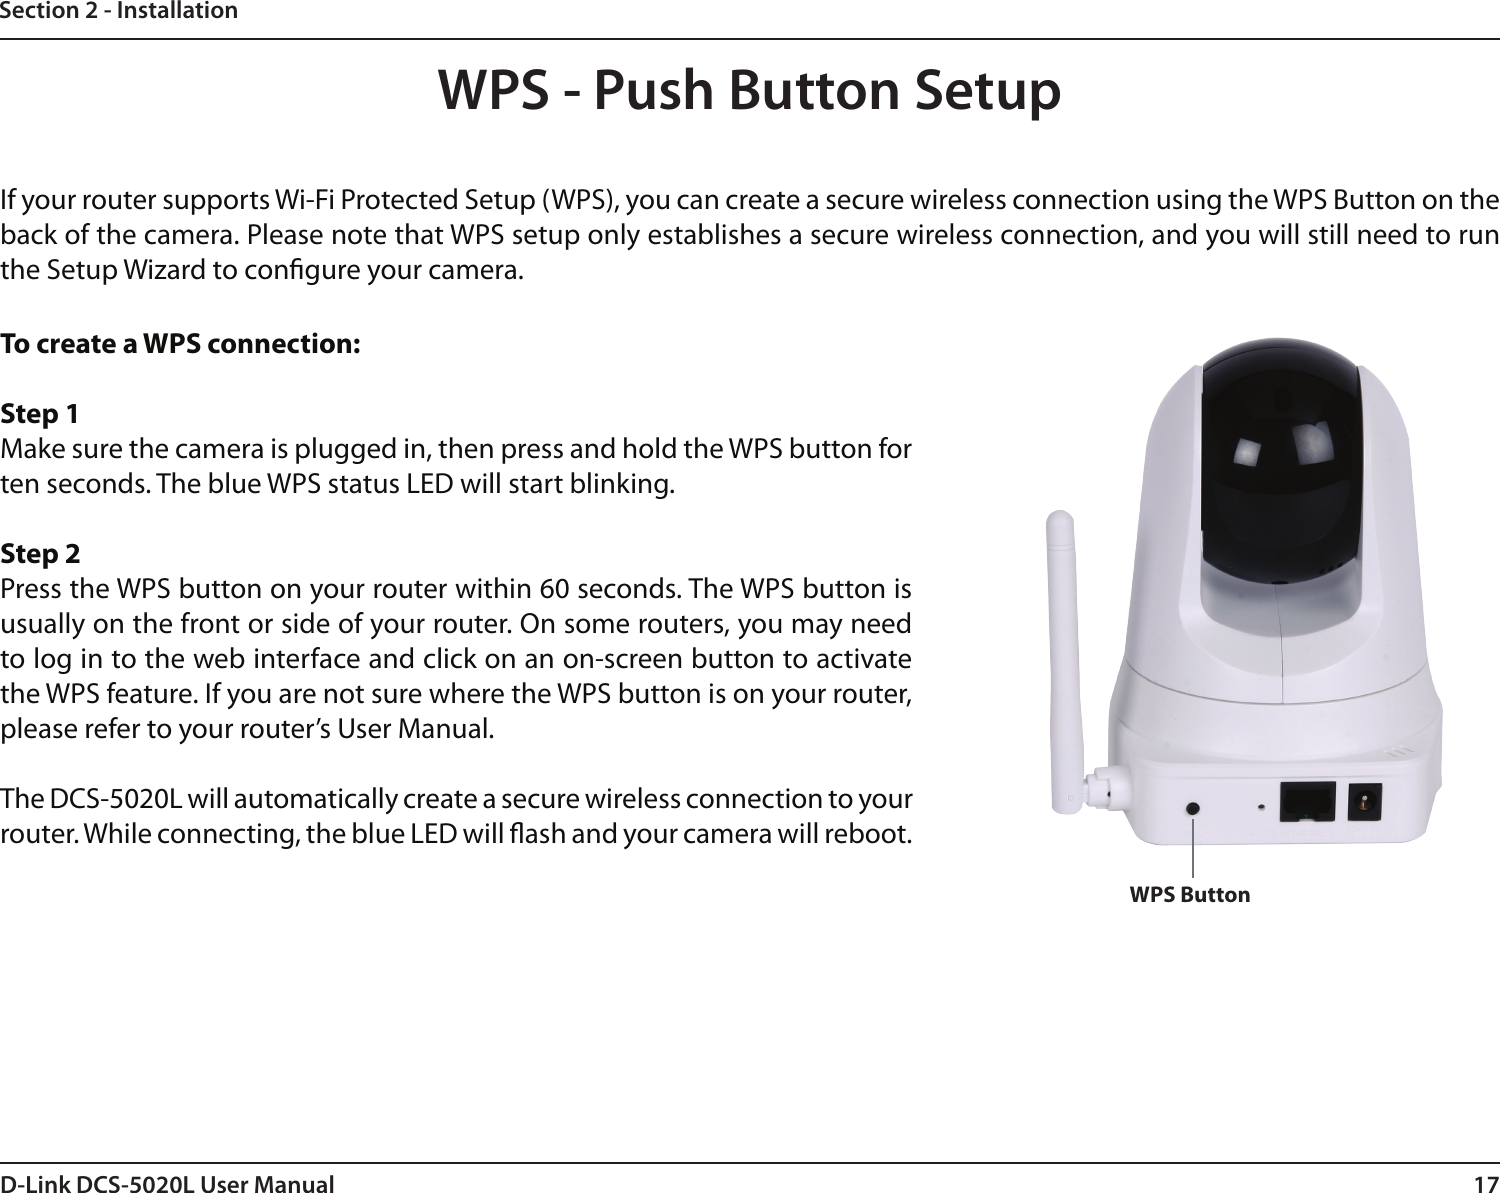 17D-Link DCS-5020L User ManualSection 2 - InstallationTo create a WPS connection:Step 1Make sure the camera is plugged in, then press and hold the WPS button for ten seconds. The blue WPS status LED will start blinking.Step 2Press the WPS button on your router within 60 seconds. The WPS button is usually on the front or side of your router. On some routers, you may need to log in to the web interface and click on an on-screen button to activate the WPS feature. If you are not sure where the WPS button is on your router, please refer to your router’s User Manual.The DCS-5020L will automatically create a secure wireless connection to your router. While connecting, the blue LED will ash and your camera will reboot.WPS - Push Button SetupWPS ButtonIf your router supports Wi-Fi Protected Setup (WPS), you can create a secure wireless connection using the WPS Button on the back of the camera. Please note that WPS setup only establishes a secure wireless connection, and you will still need to run the Setup Wizard to congure your camera.